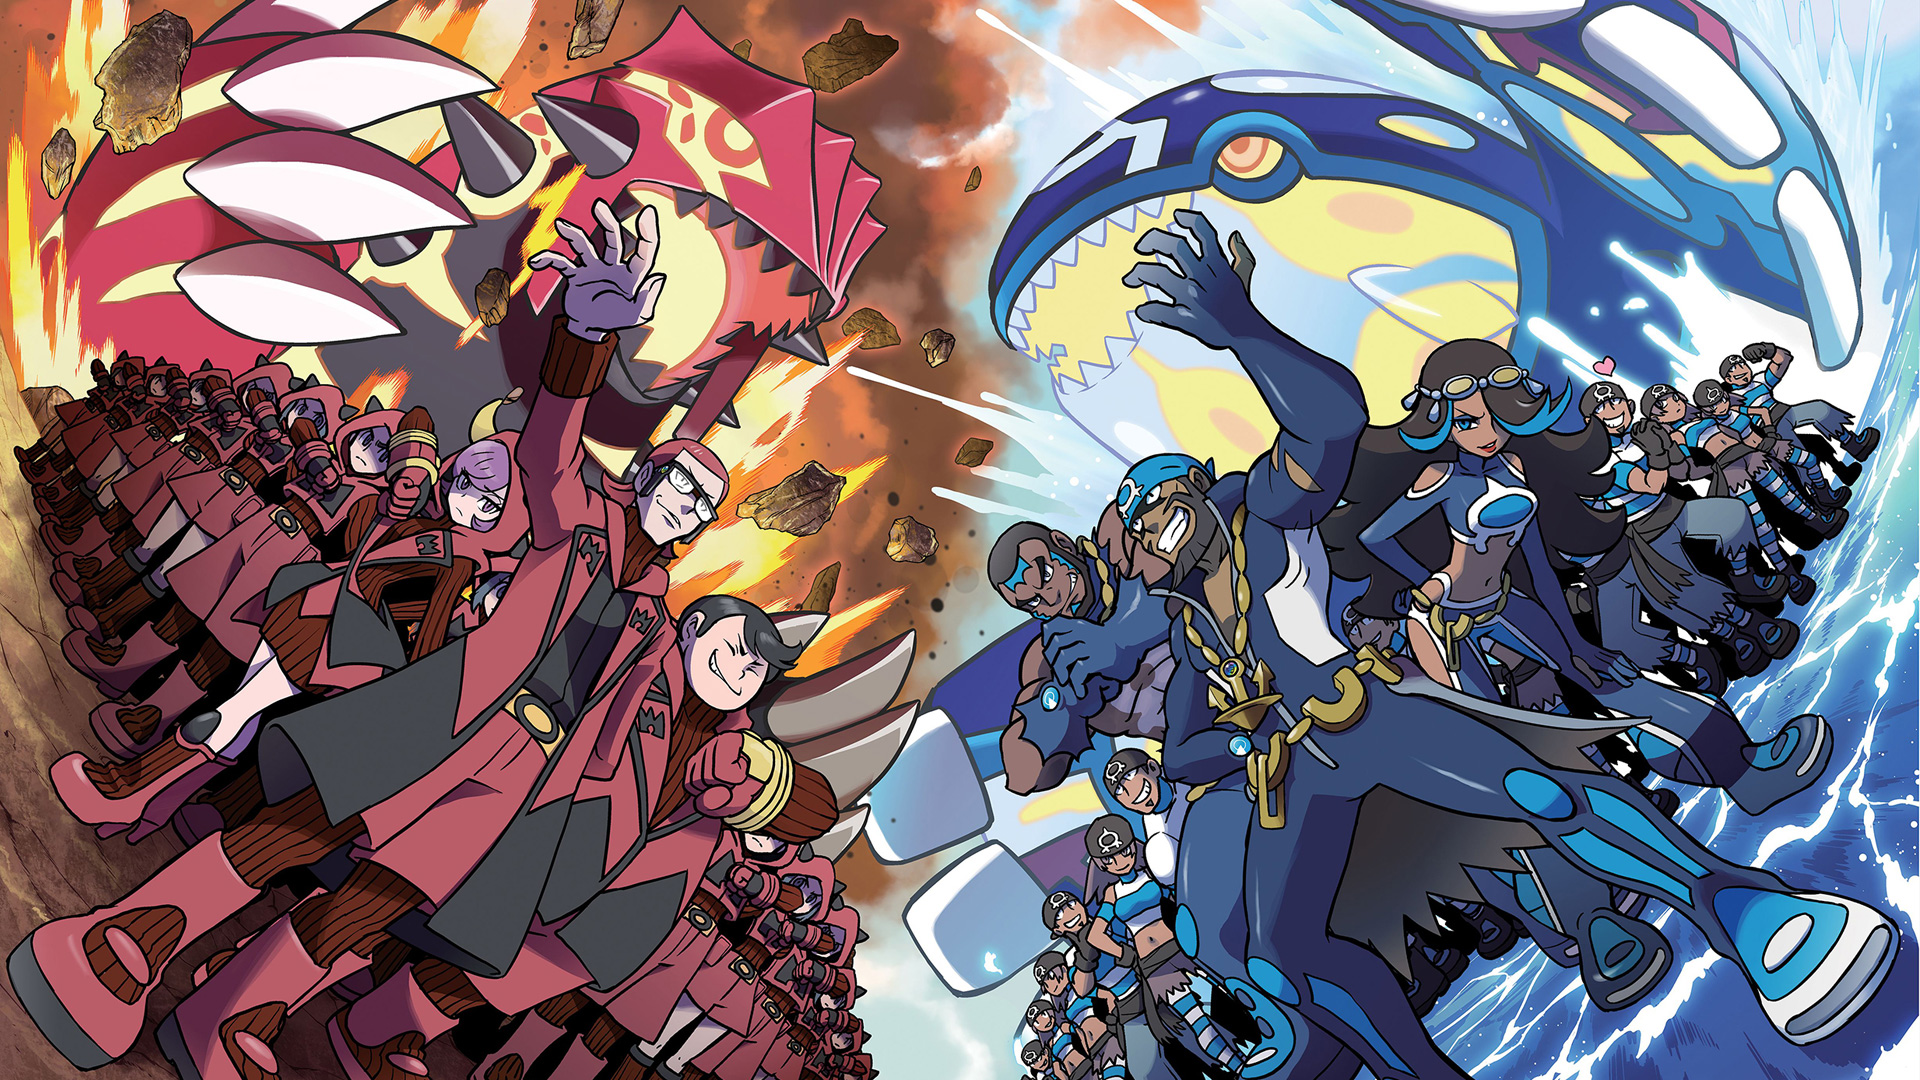 pokemon omega ruby and alpha sapphire for pc